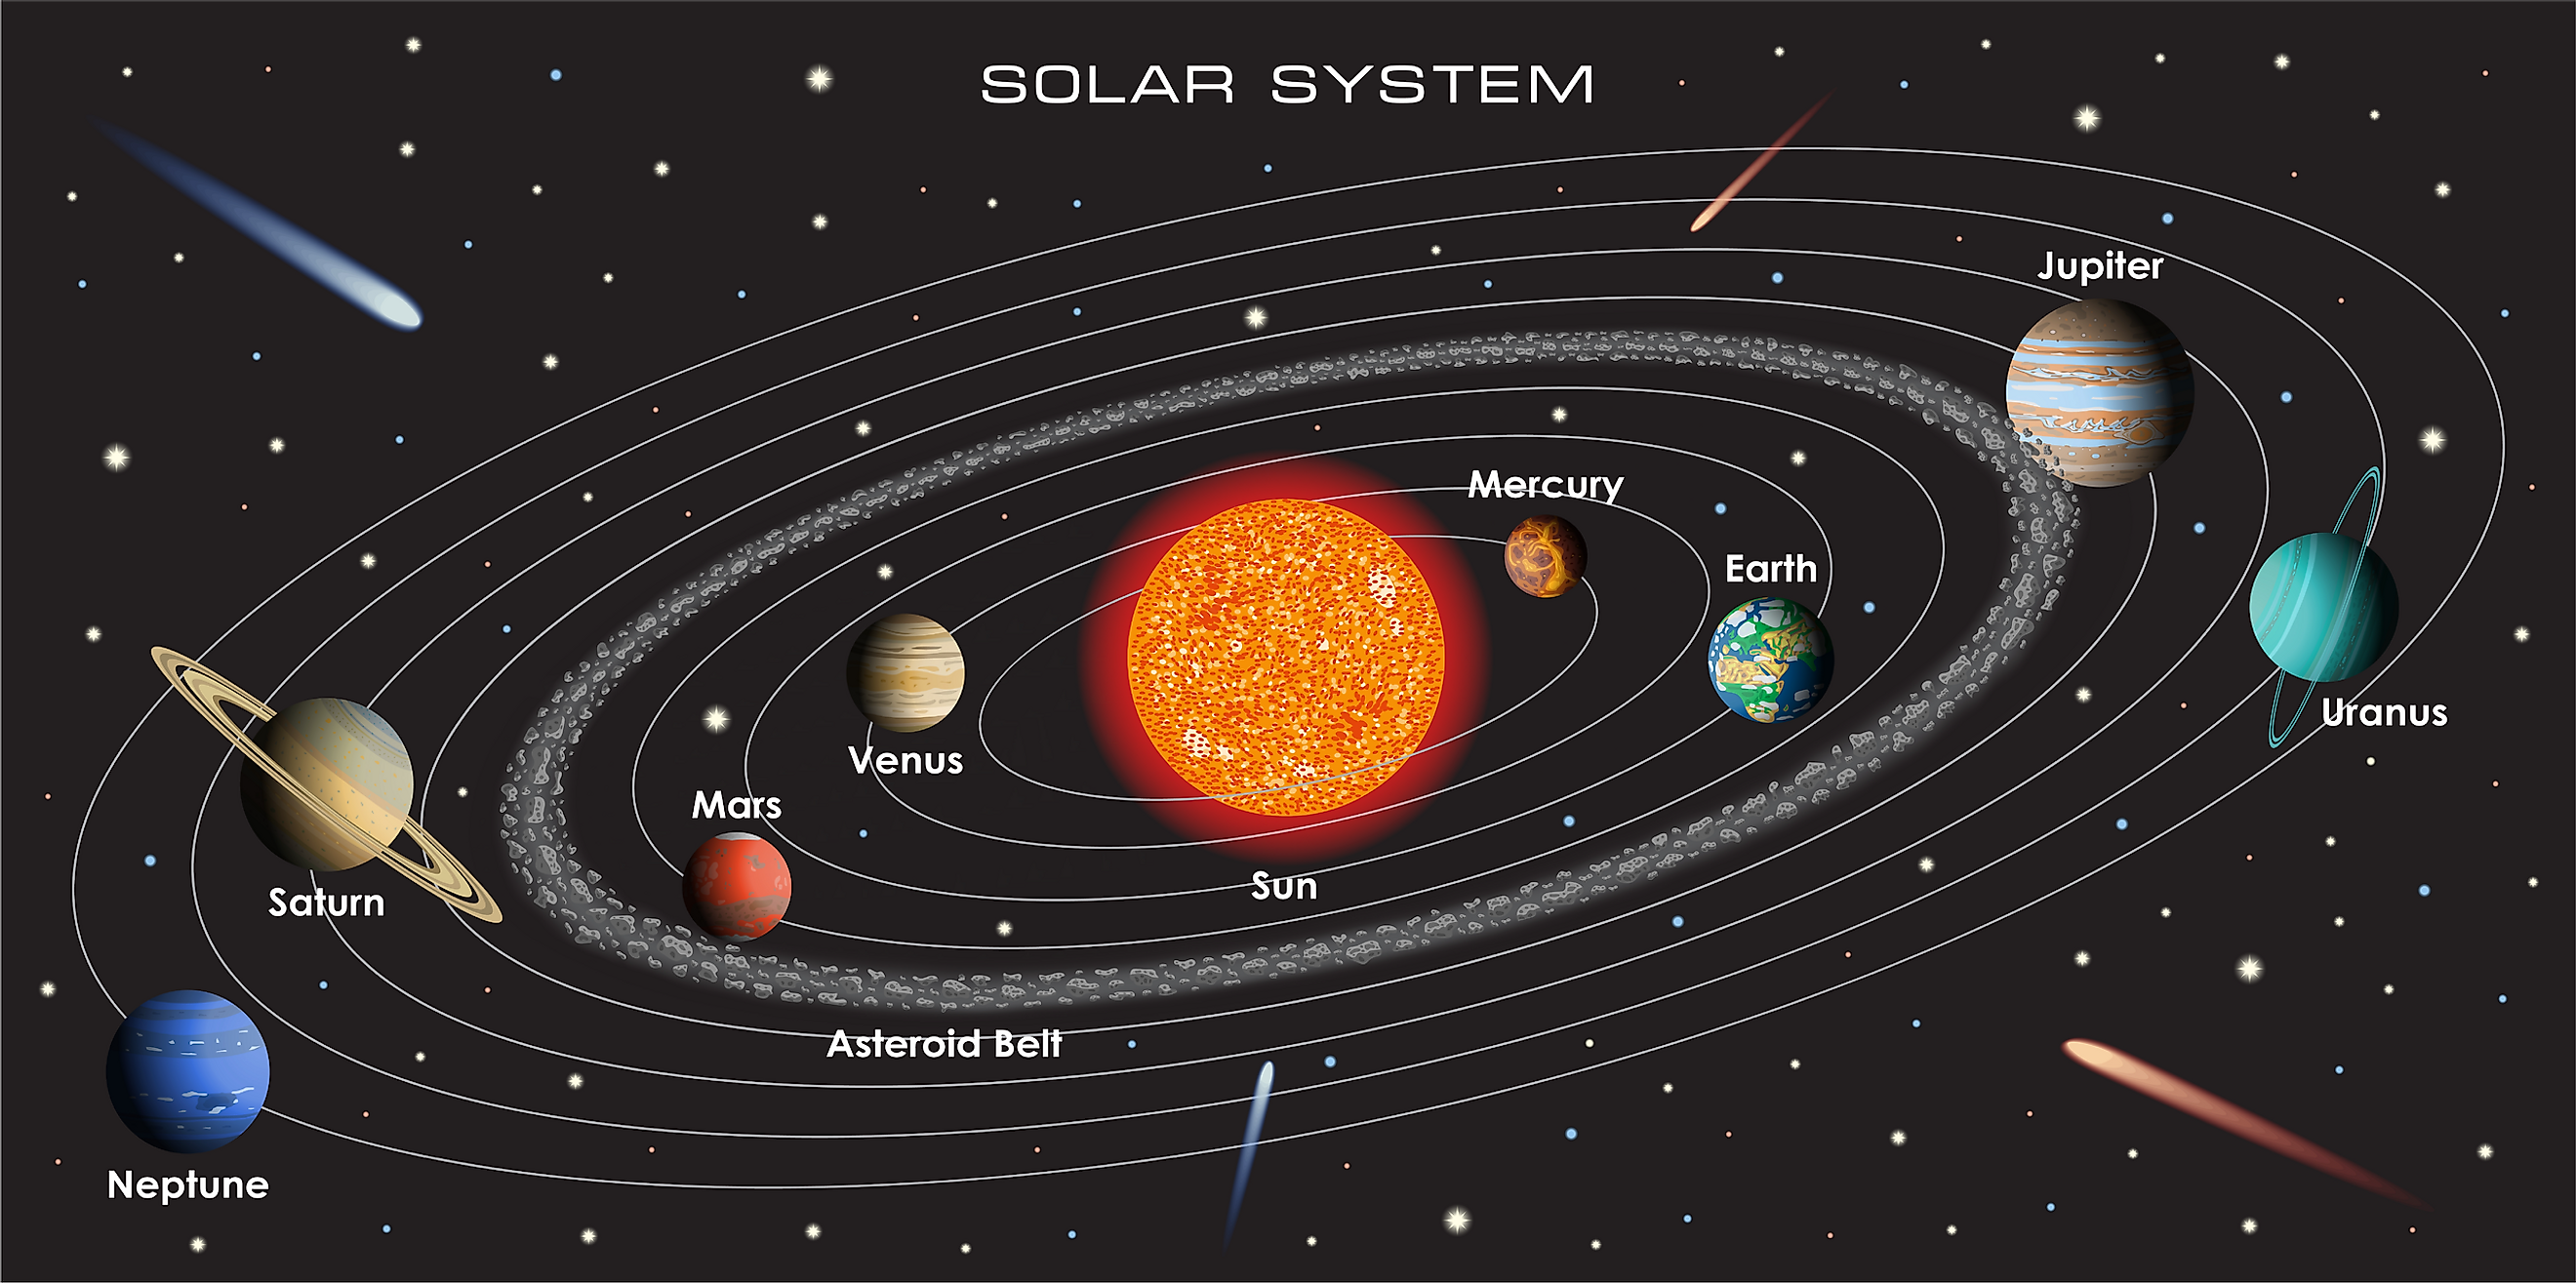 How Many Planets Are There In The Solar System? - WorldAtlas